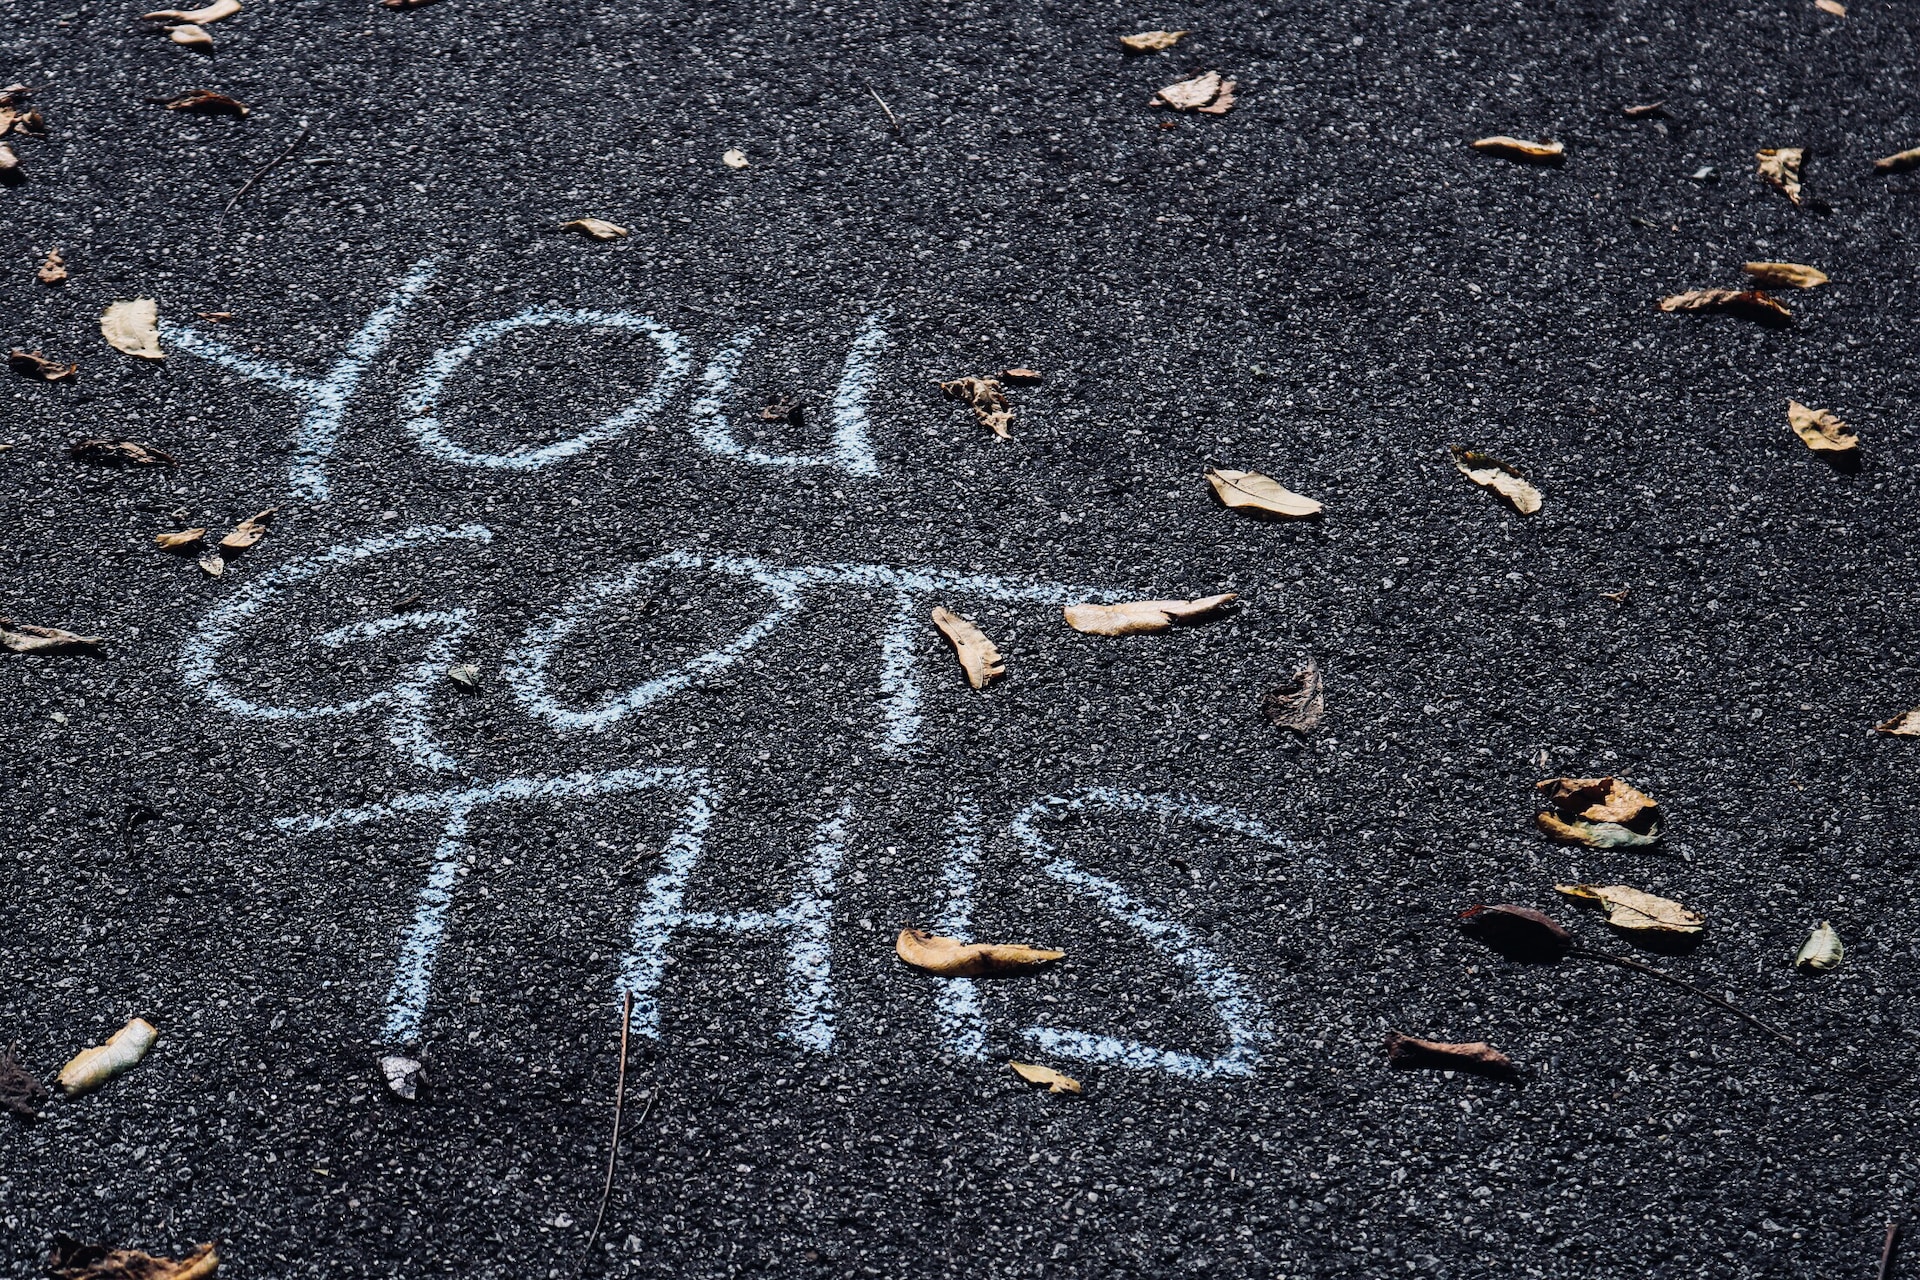 'You Got This' written in chalk on pavement. 